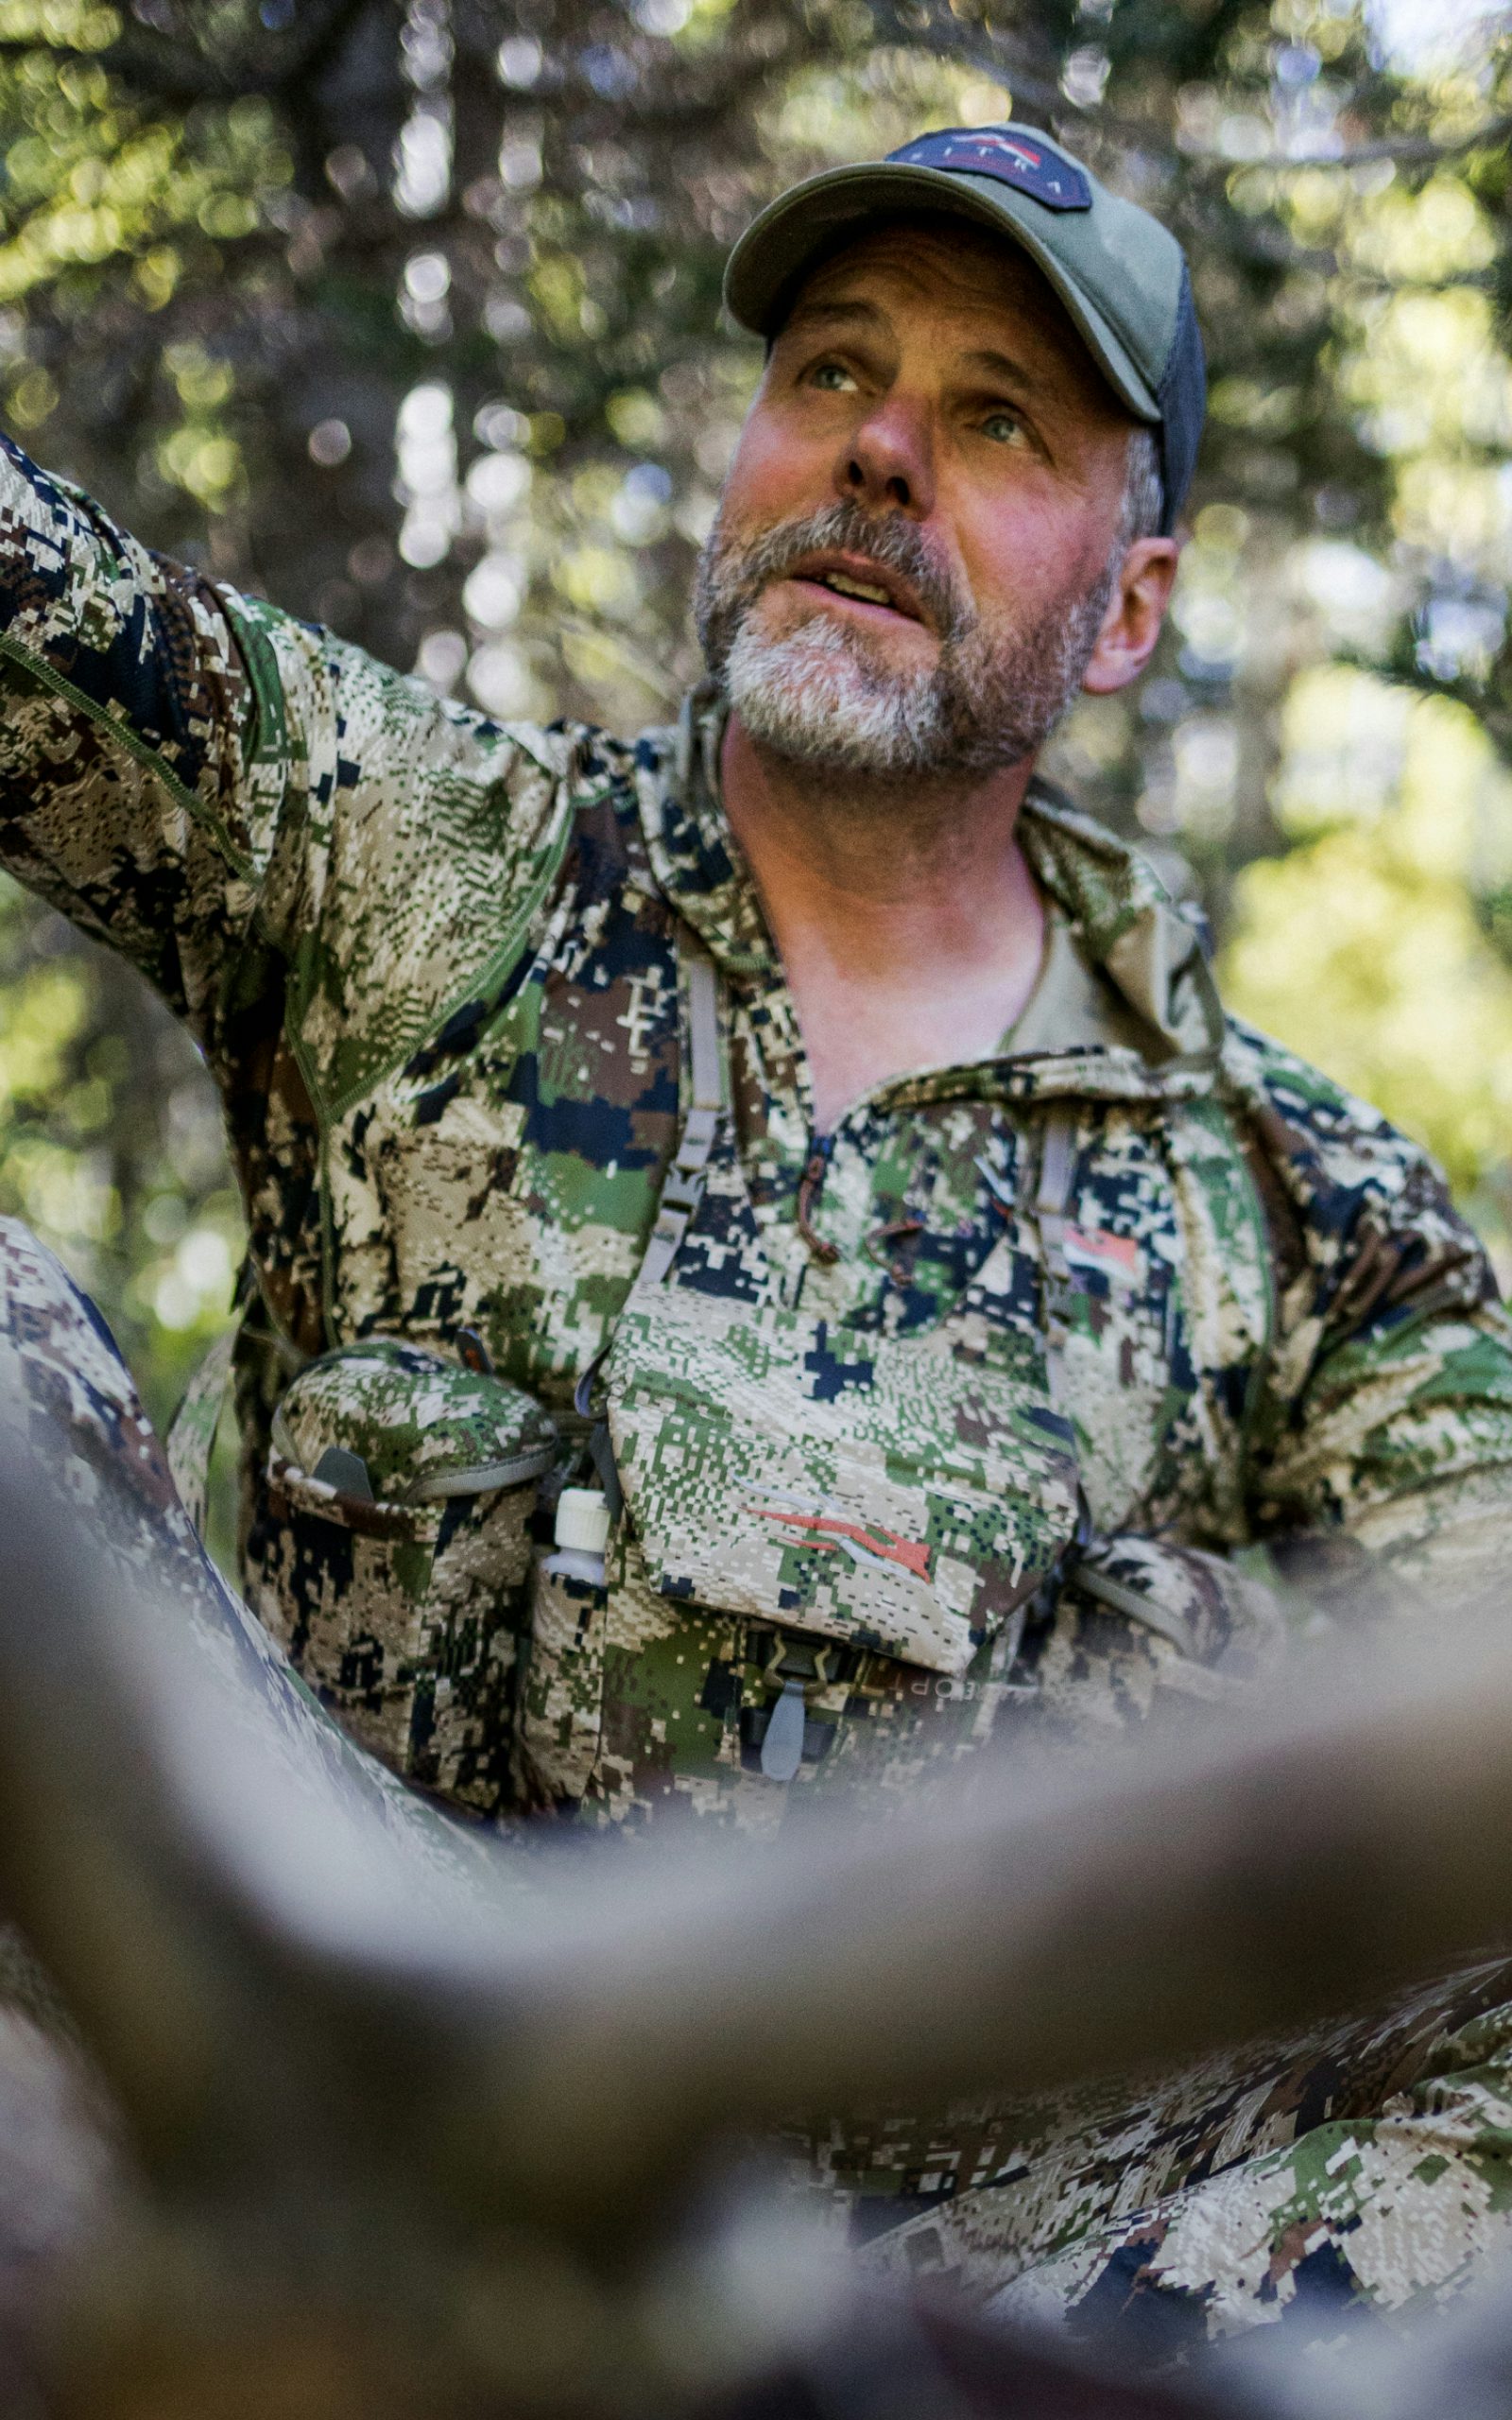 John Barklow holding onto the antlers of his harvested bull elk in Optifade Subalpine | SITKA Gear